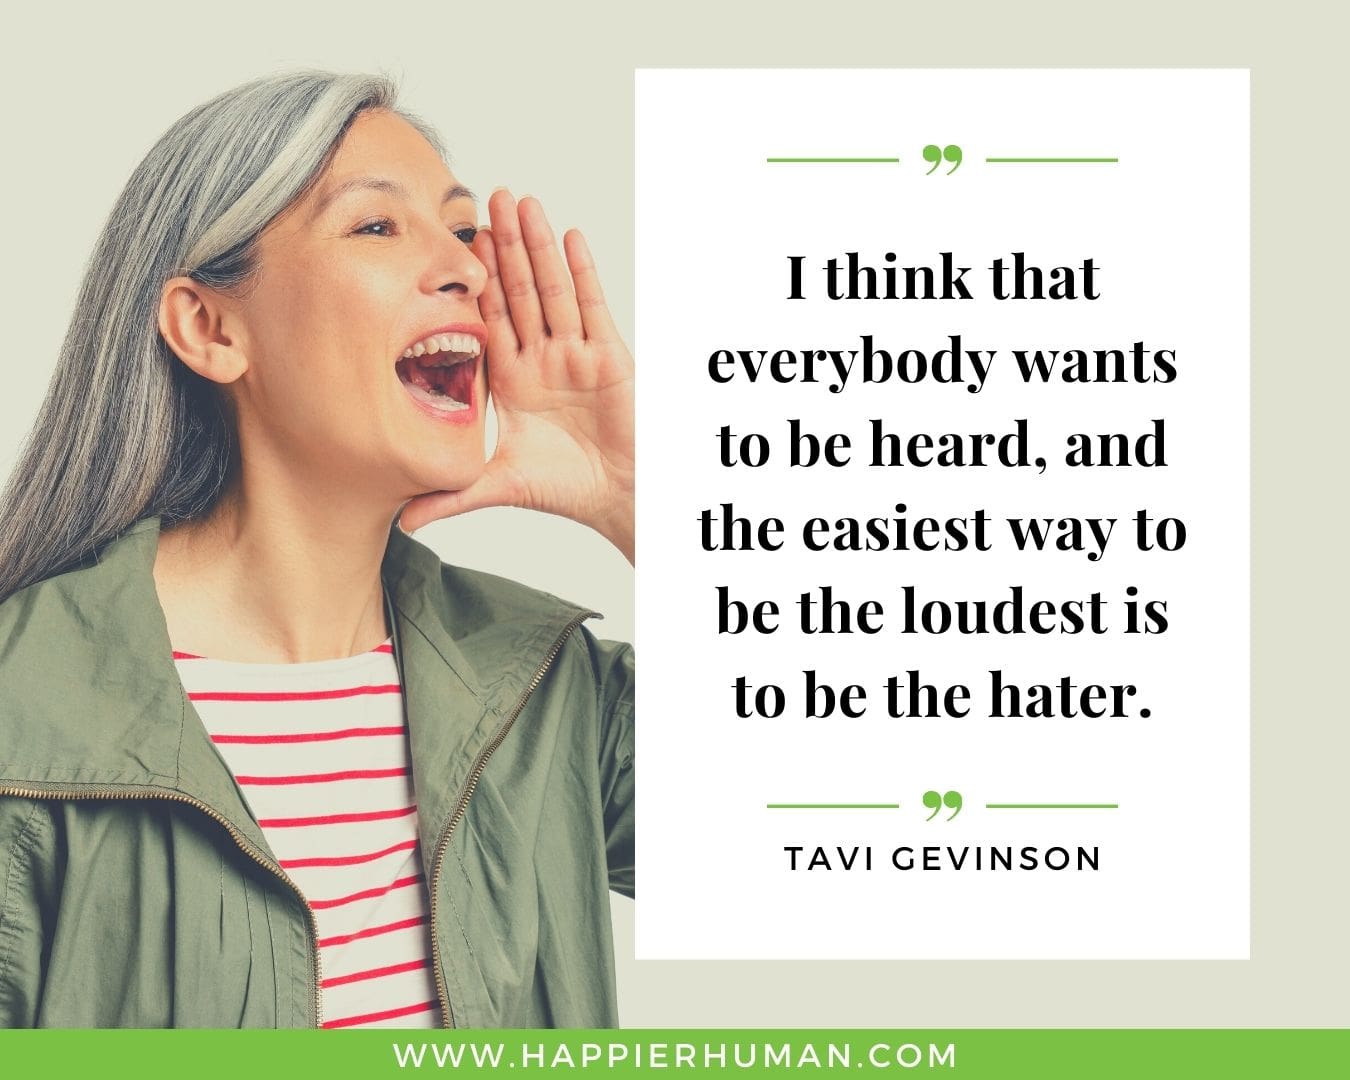 Haters Quotes - “I think that everybody wants to be heard, and the easiest way to be the loudest is to be the hater.” - Tavi Gevinson